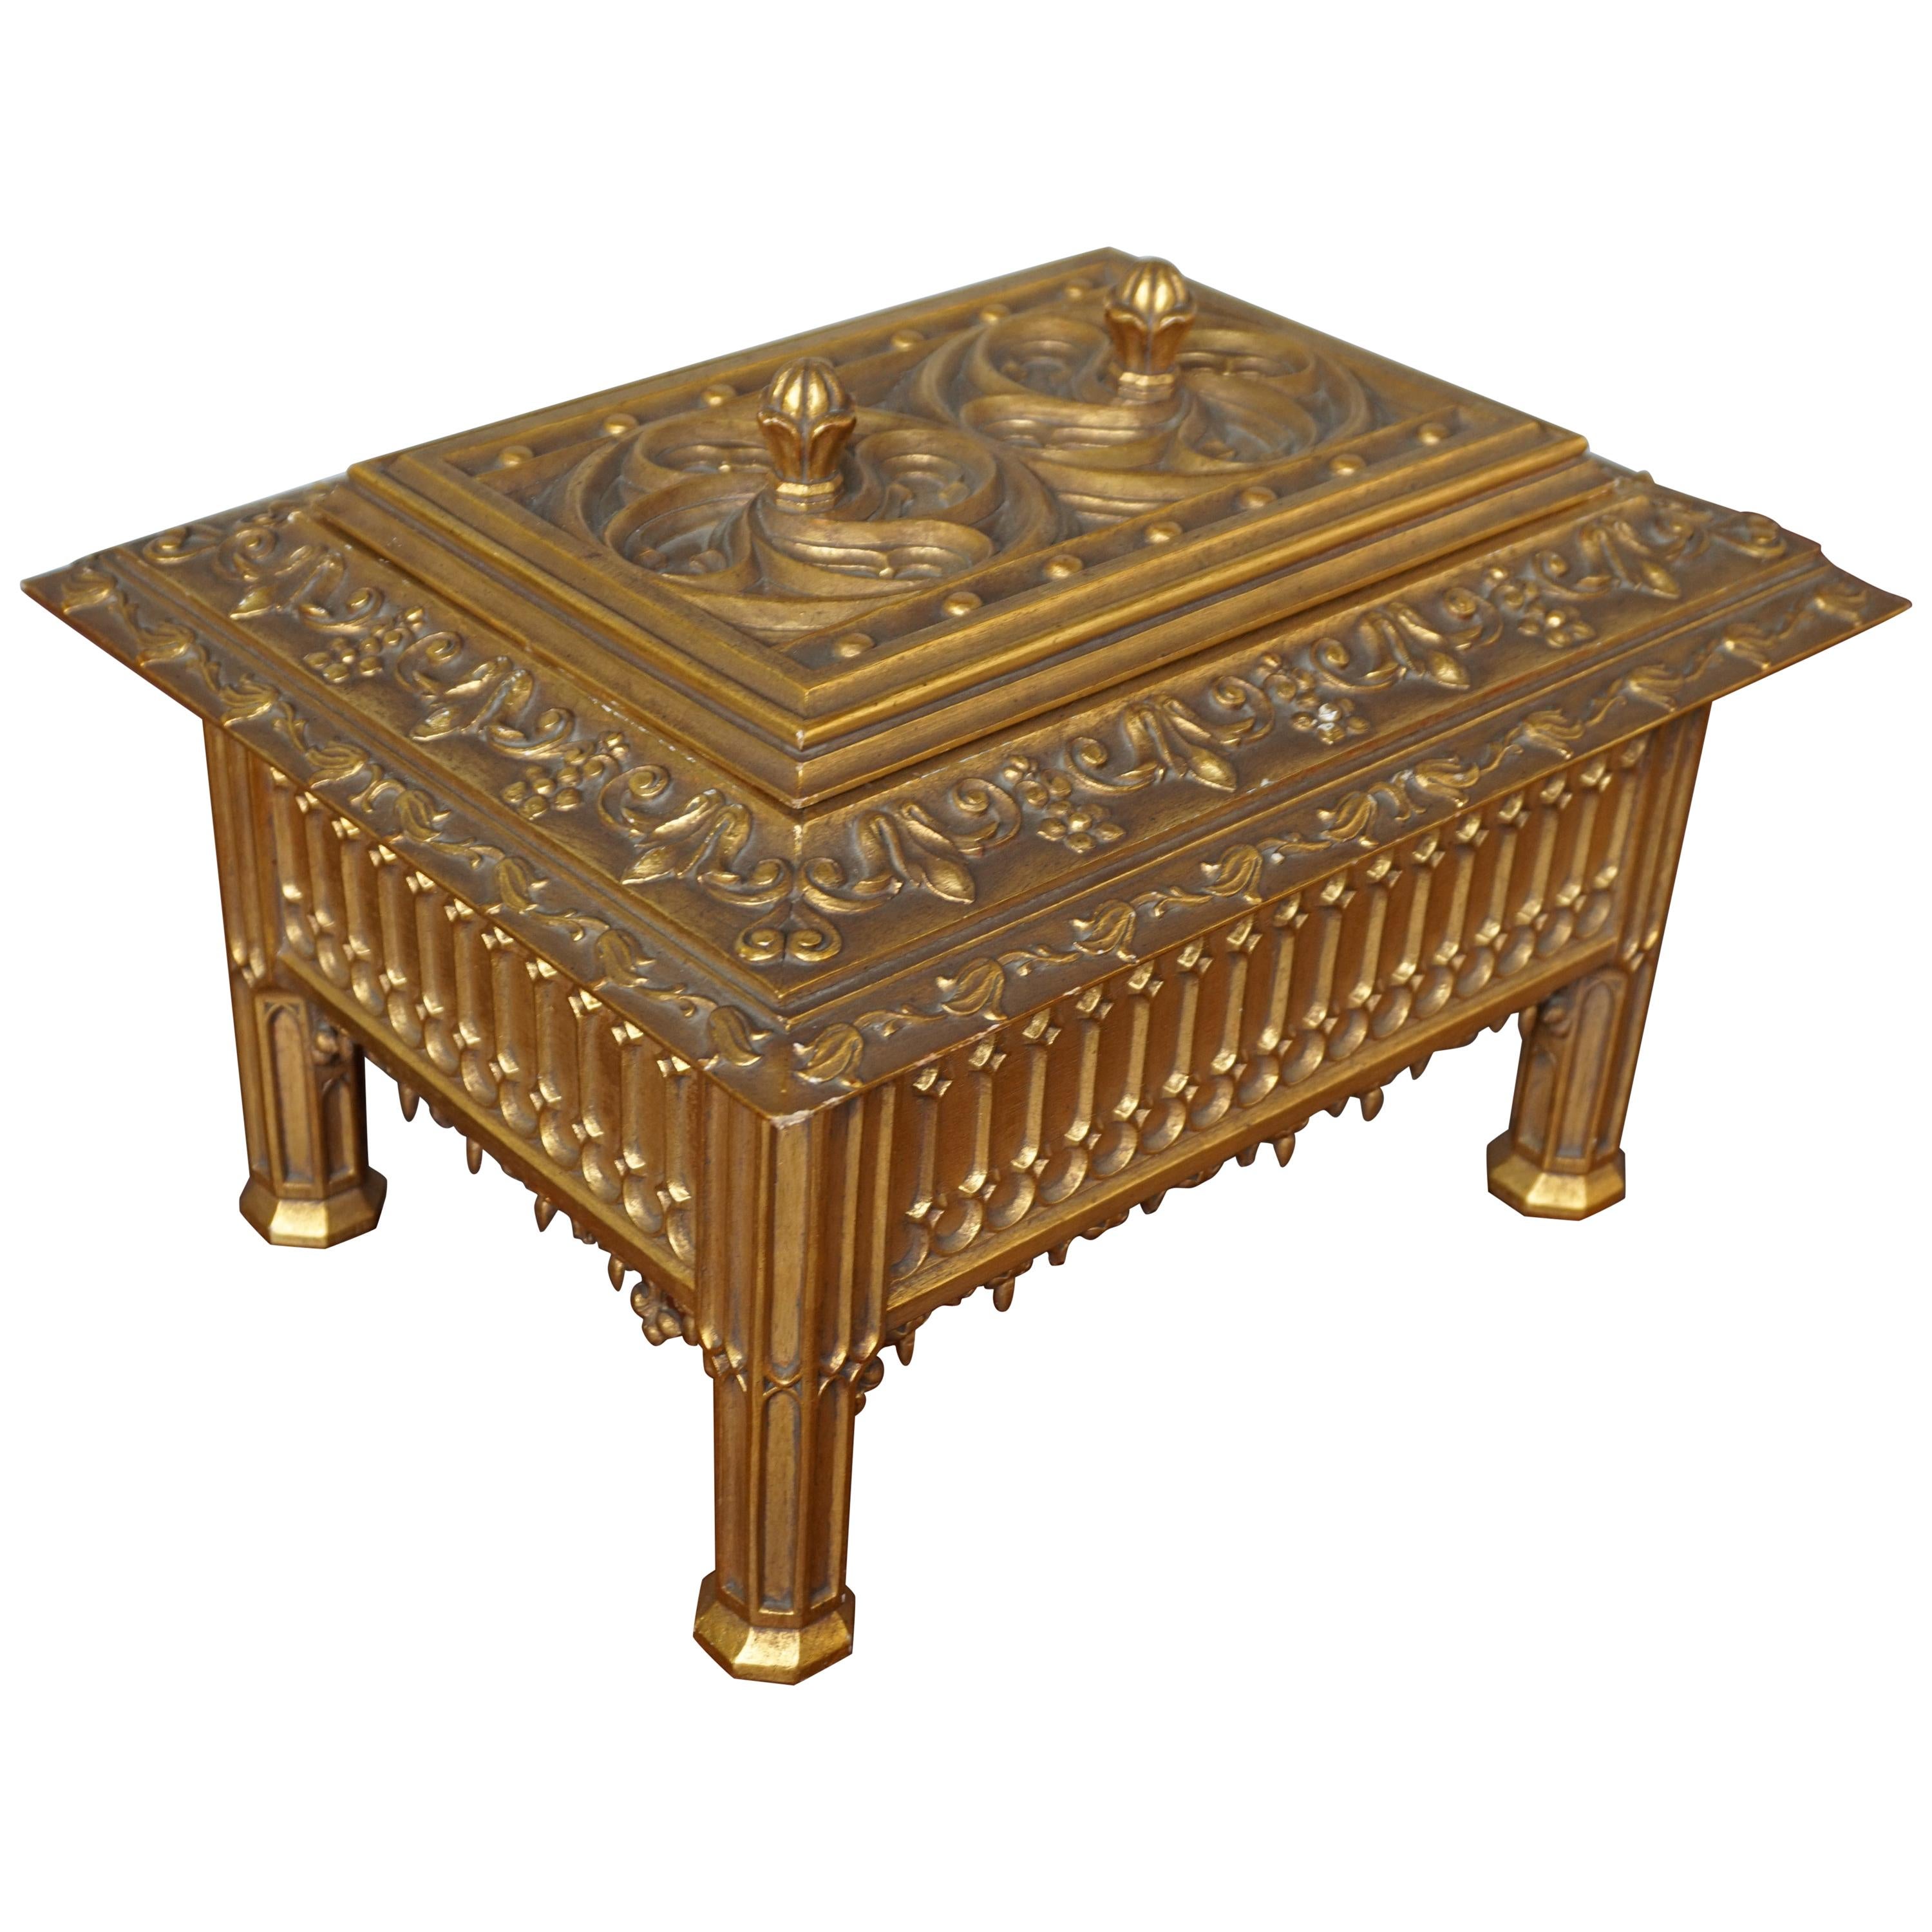 Unique Hand Carved and Gilt Oak Gothic Revival Church Reliquary Casket with Lid